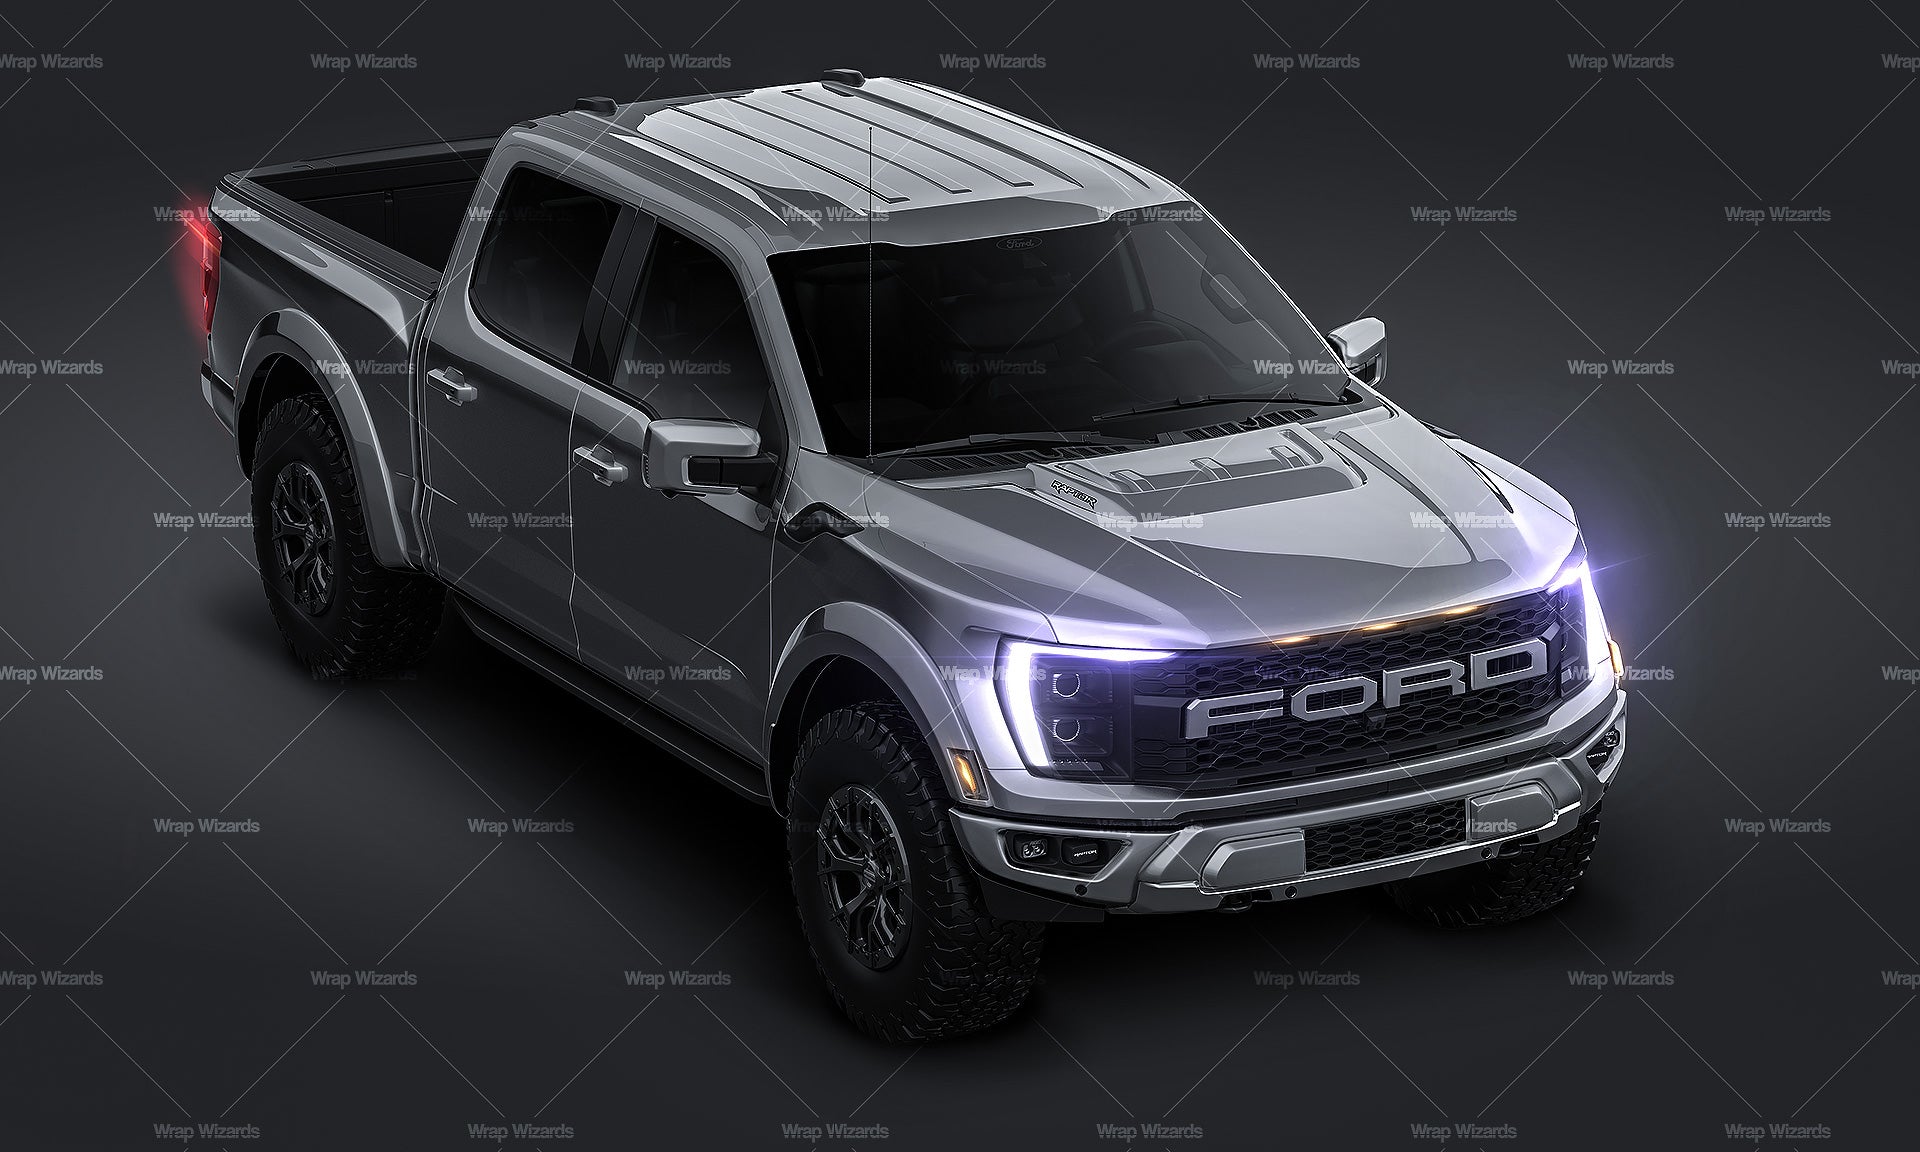 3/4 VIEW - Ford F150 Raptor 2021 glossy finish - Car Mockup Template.psd